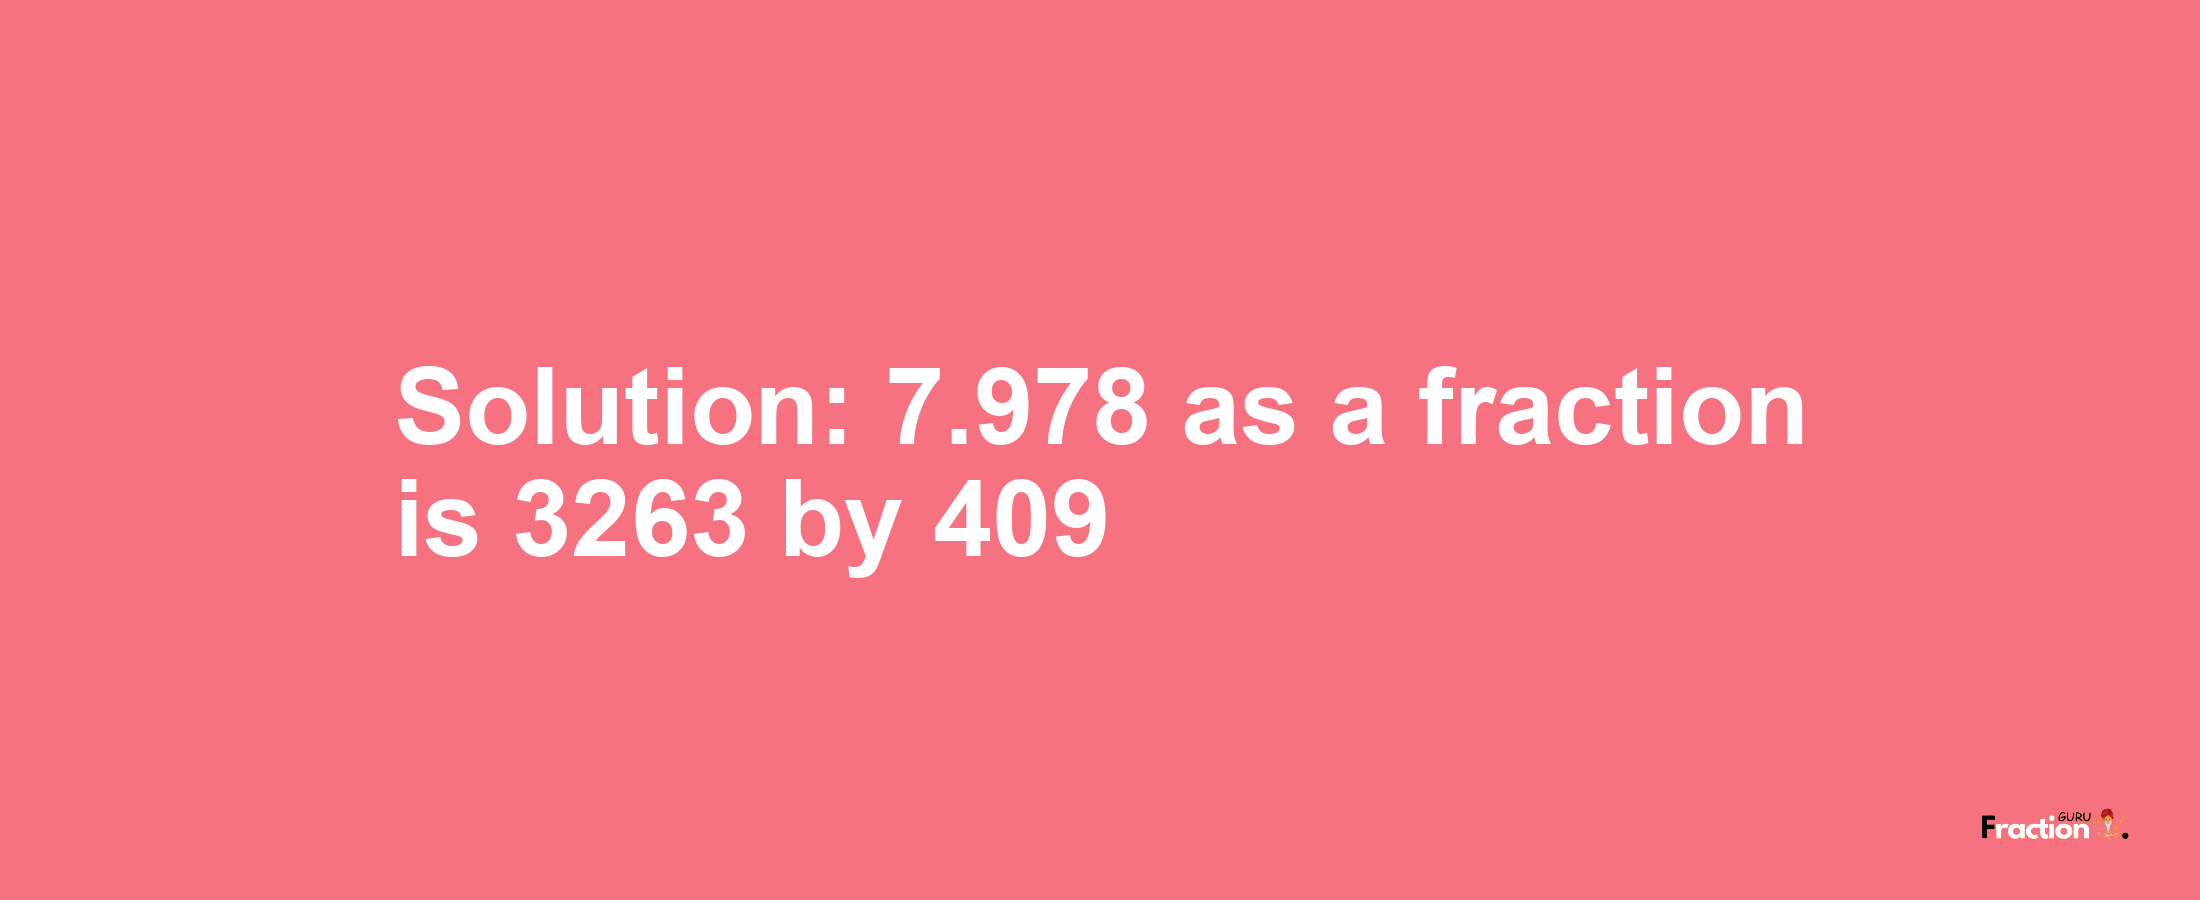 Solution:7.978 as a fraction is 3263/409